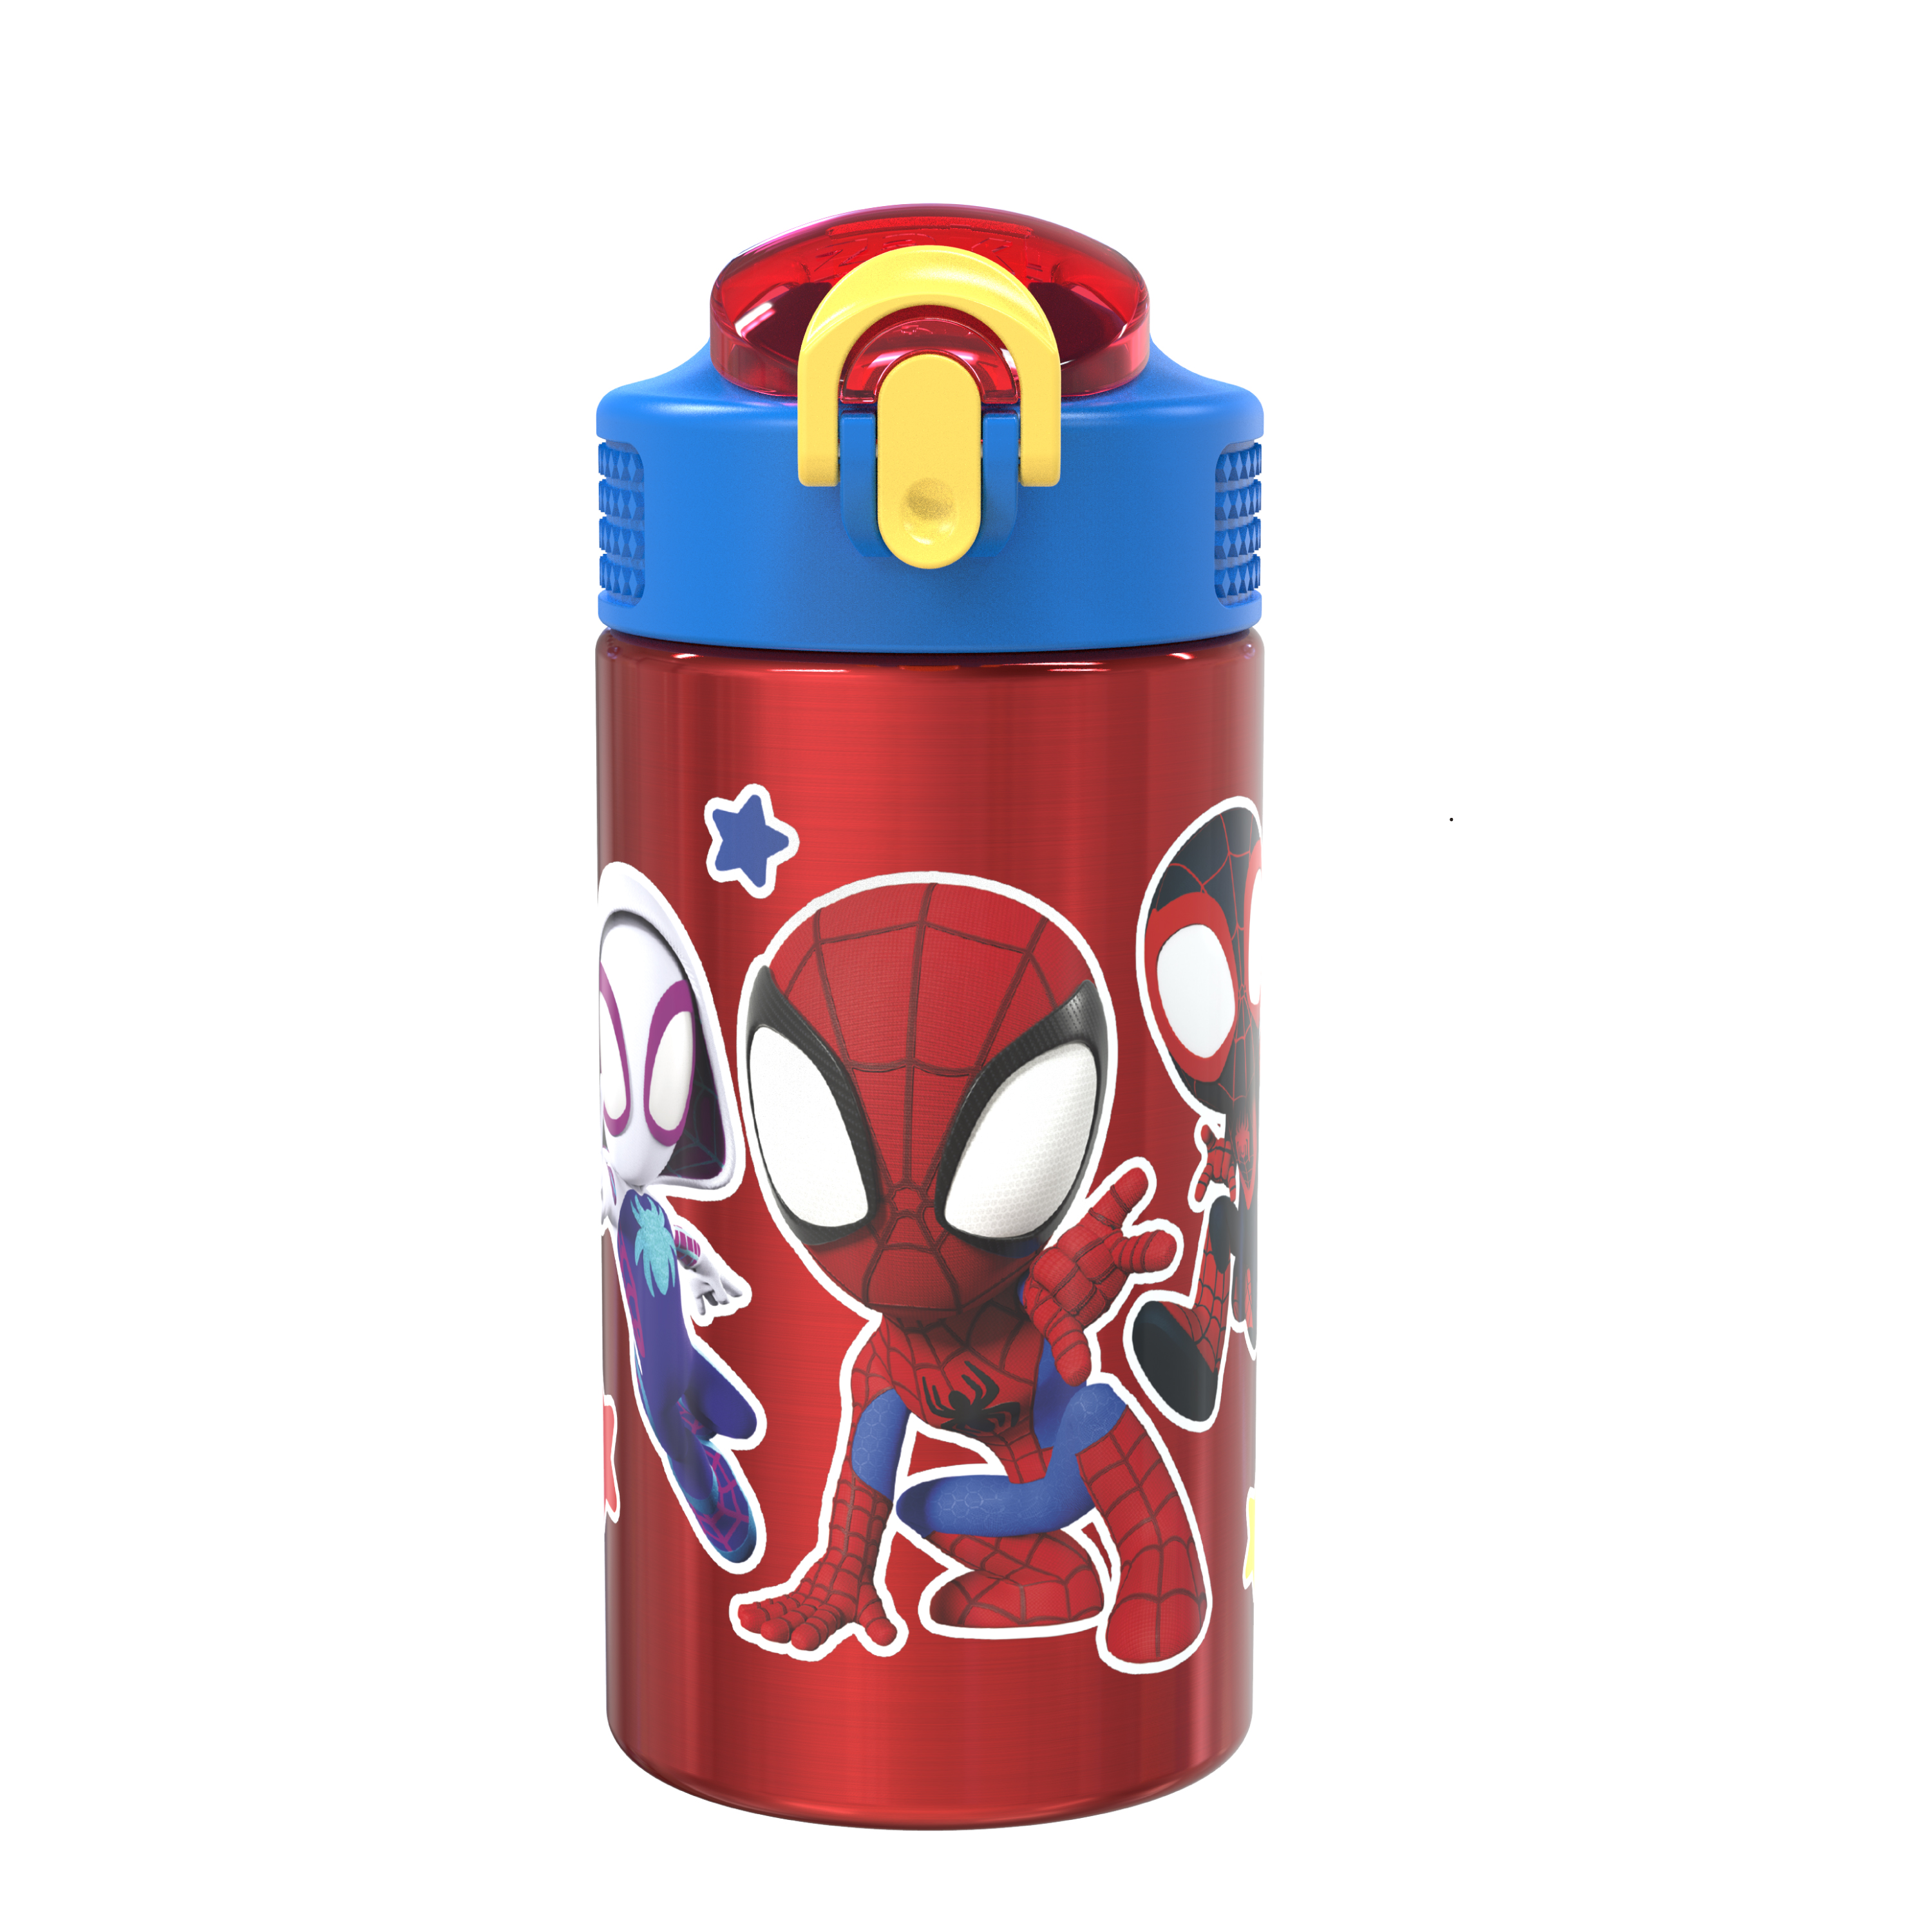 Spider-Man and His Amazing Friends 15.5 ounce Stainless Steel Water Bottle with Built-in Carrying Loop, Spider-Friends slideshow image 1